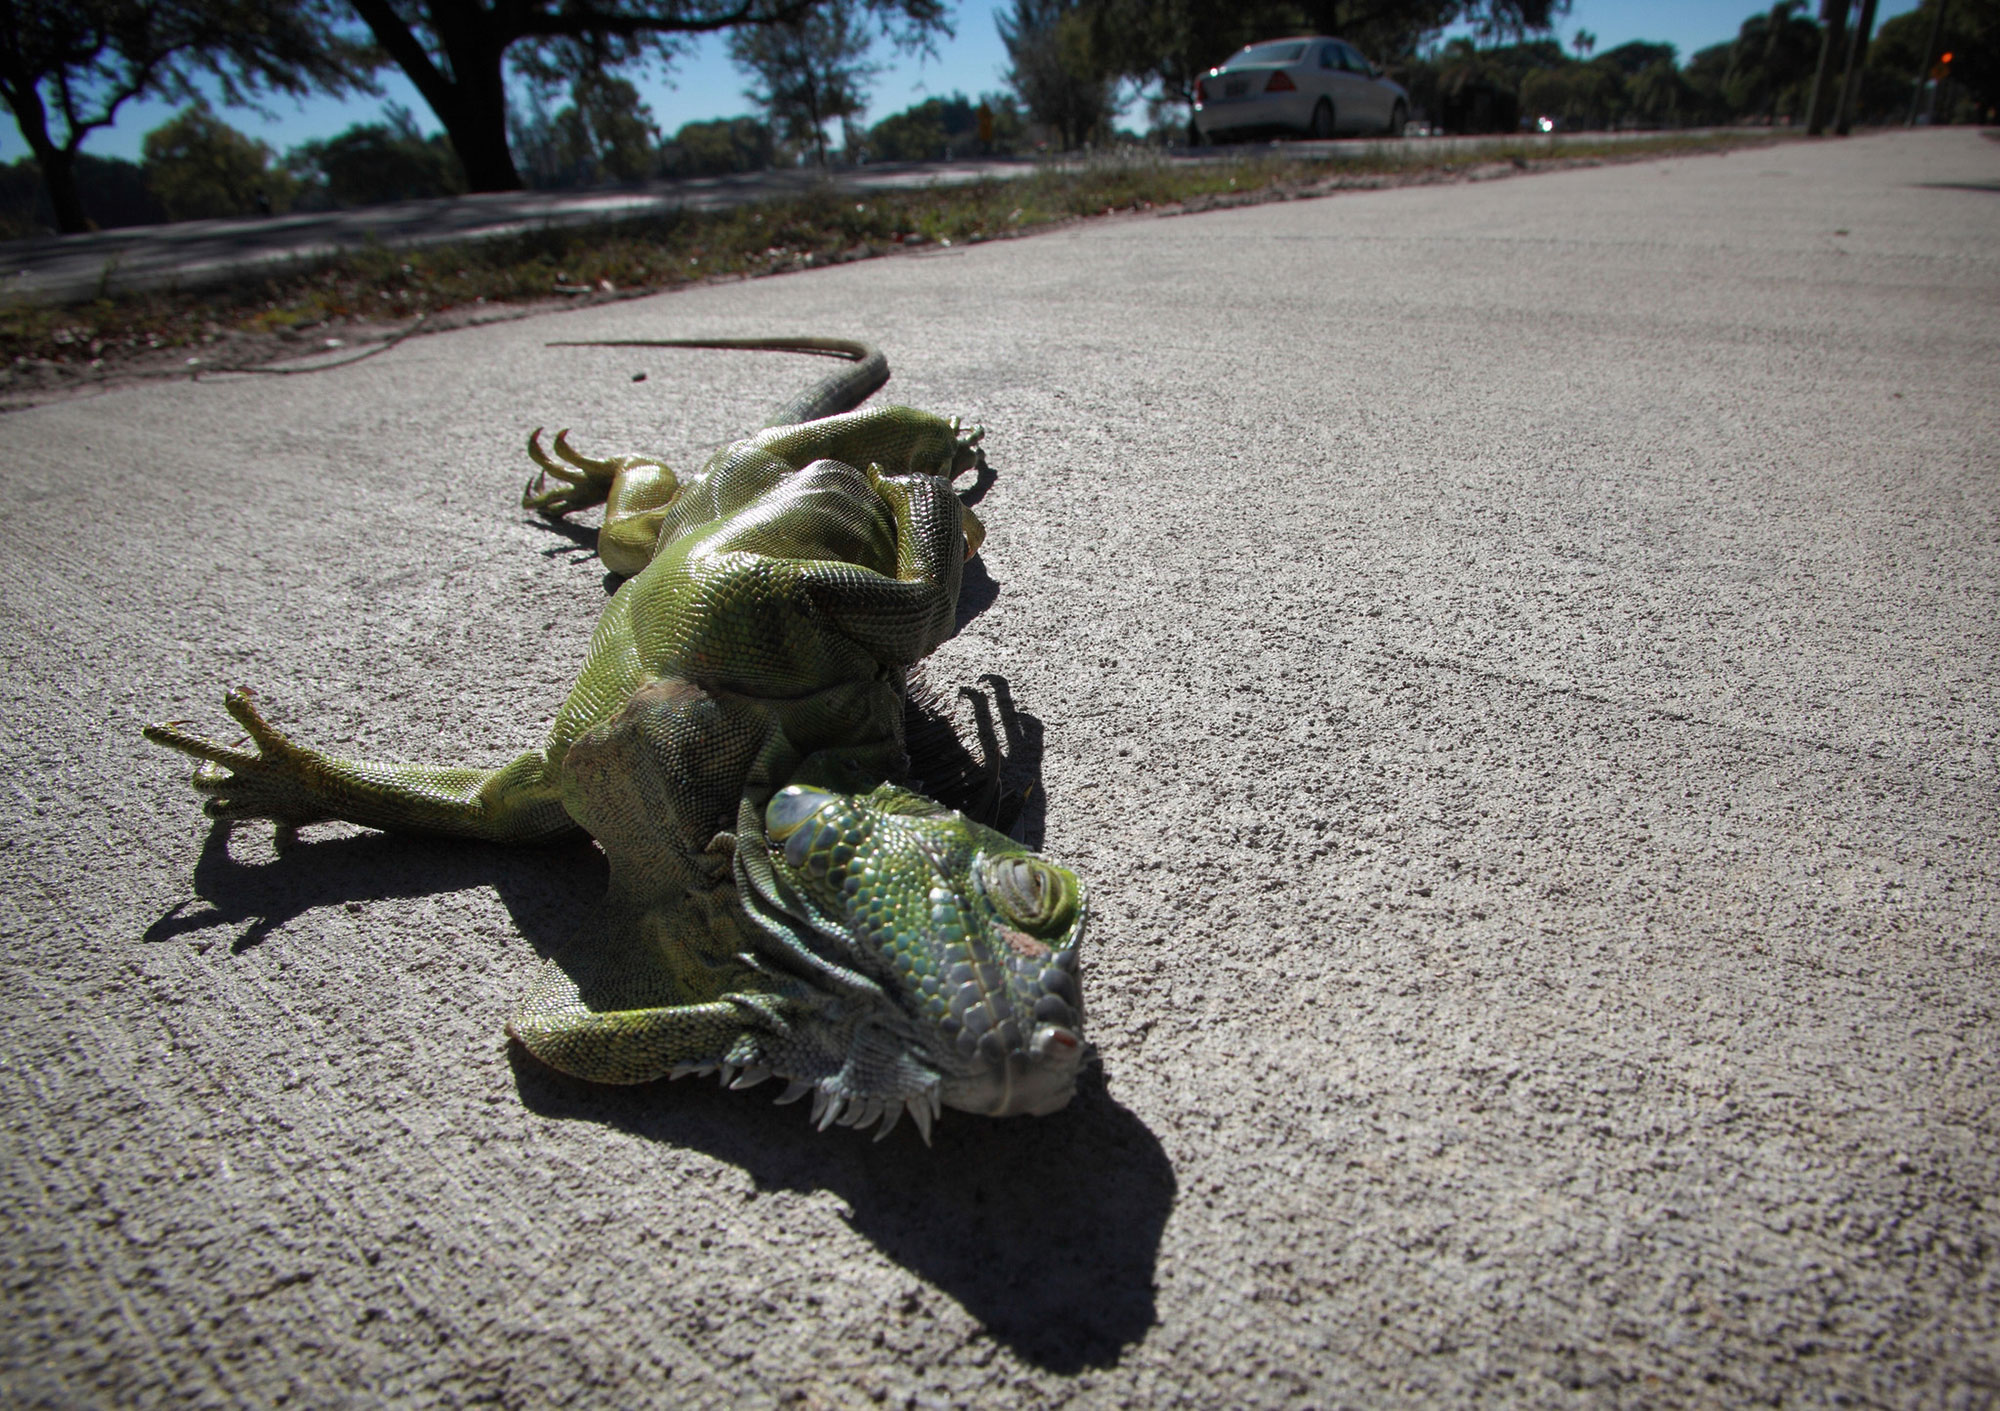 Iguanas typically begin to lose mobility when temperatures reach 50 degrees. Below that, the cold c...